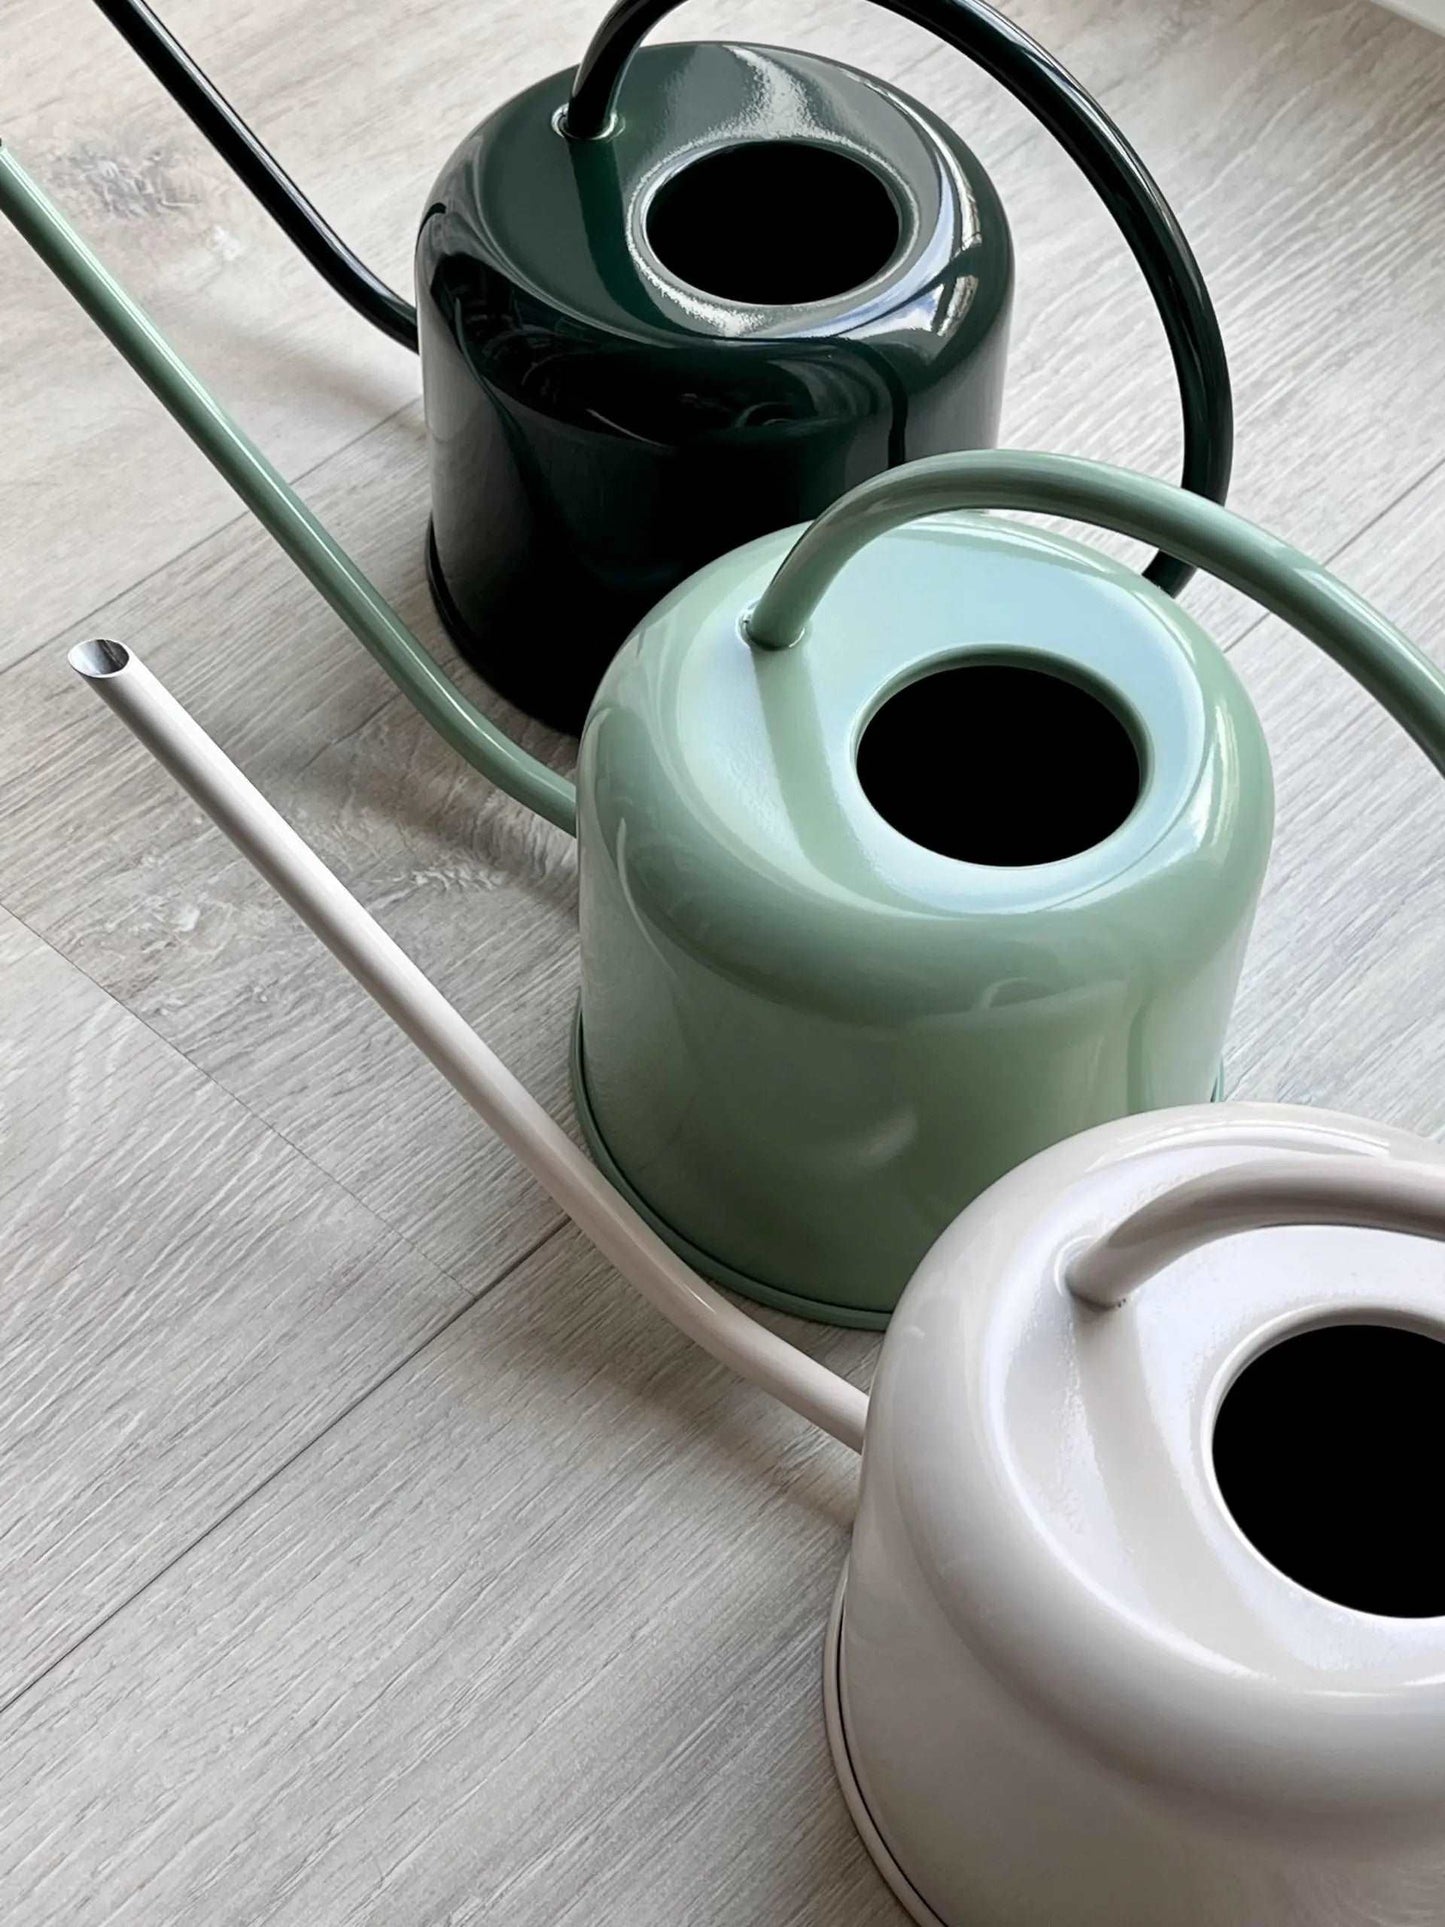 Watering Can 0,9L - Seedor